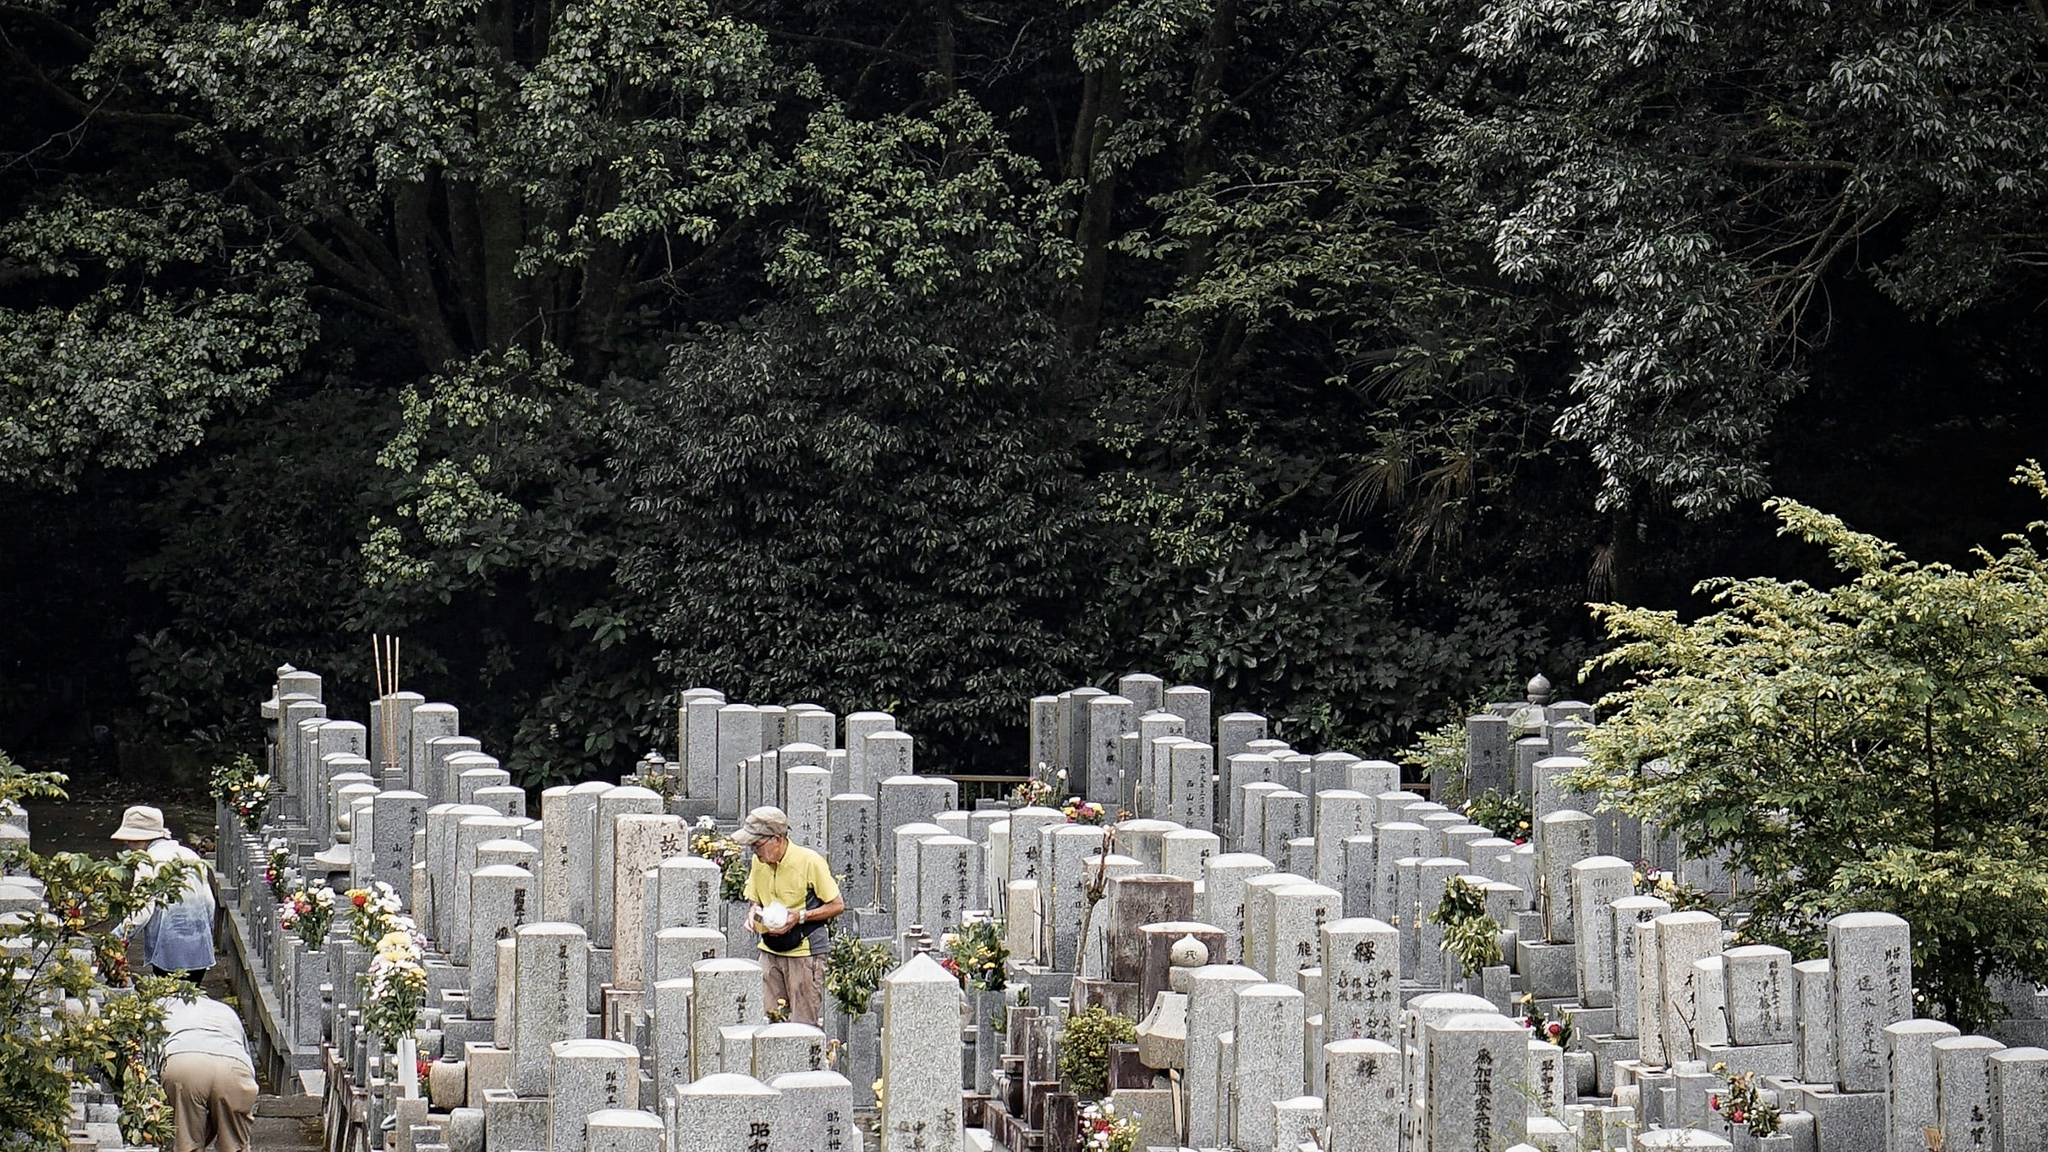 People gather at gravestones, set against lush greenery, cleaning them of debris and leaving flowers and gifts